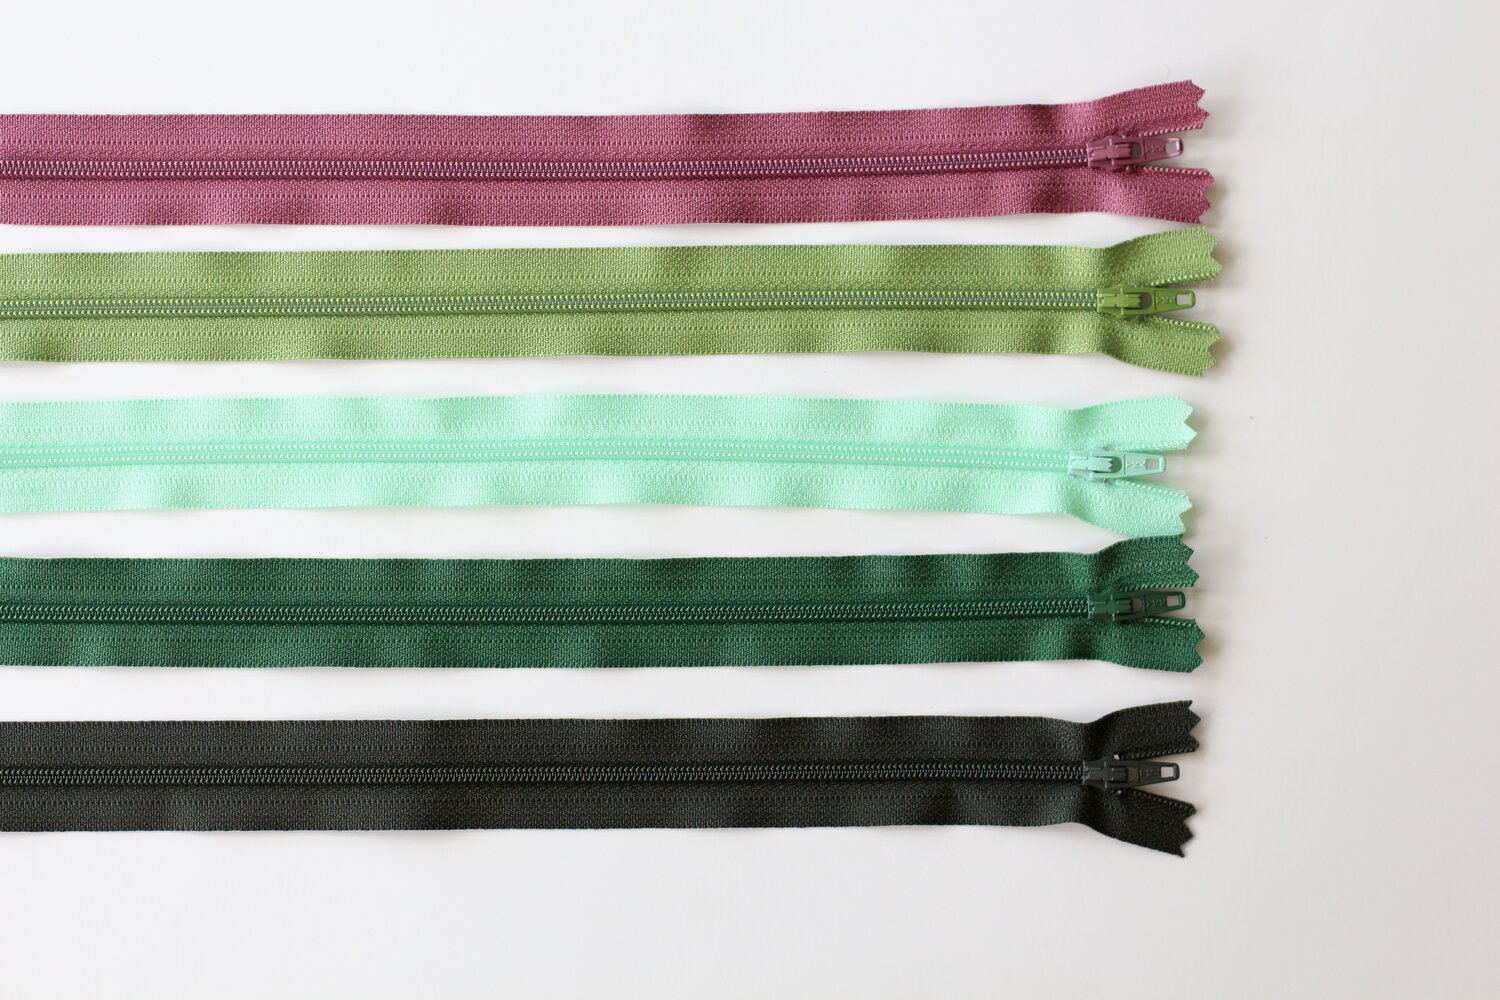 (Nylon zippers in a variety of colors)